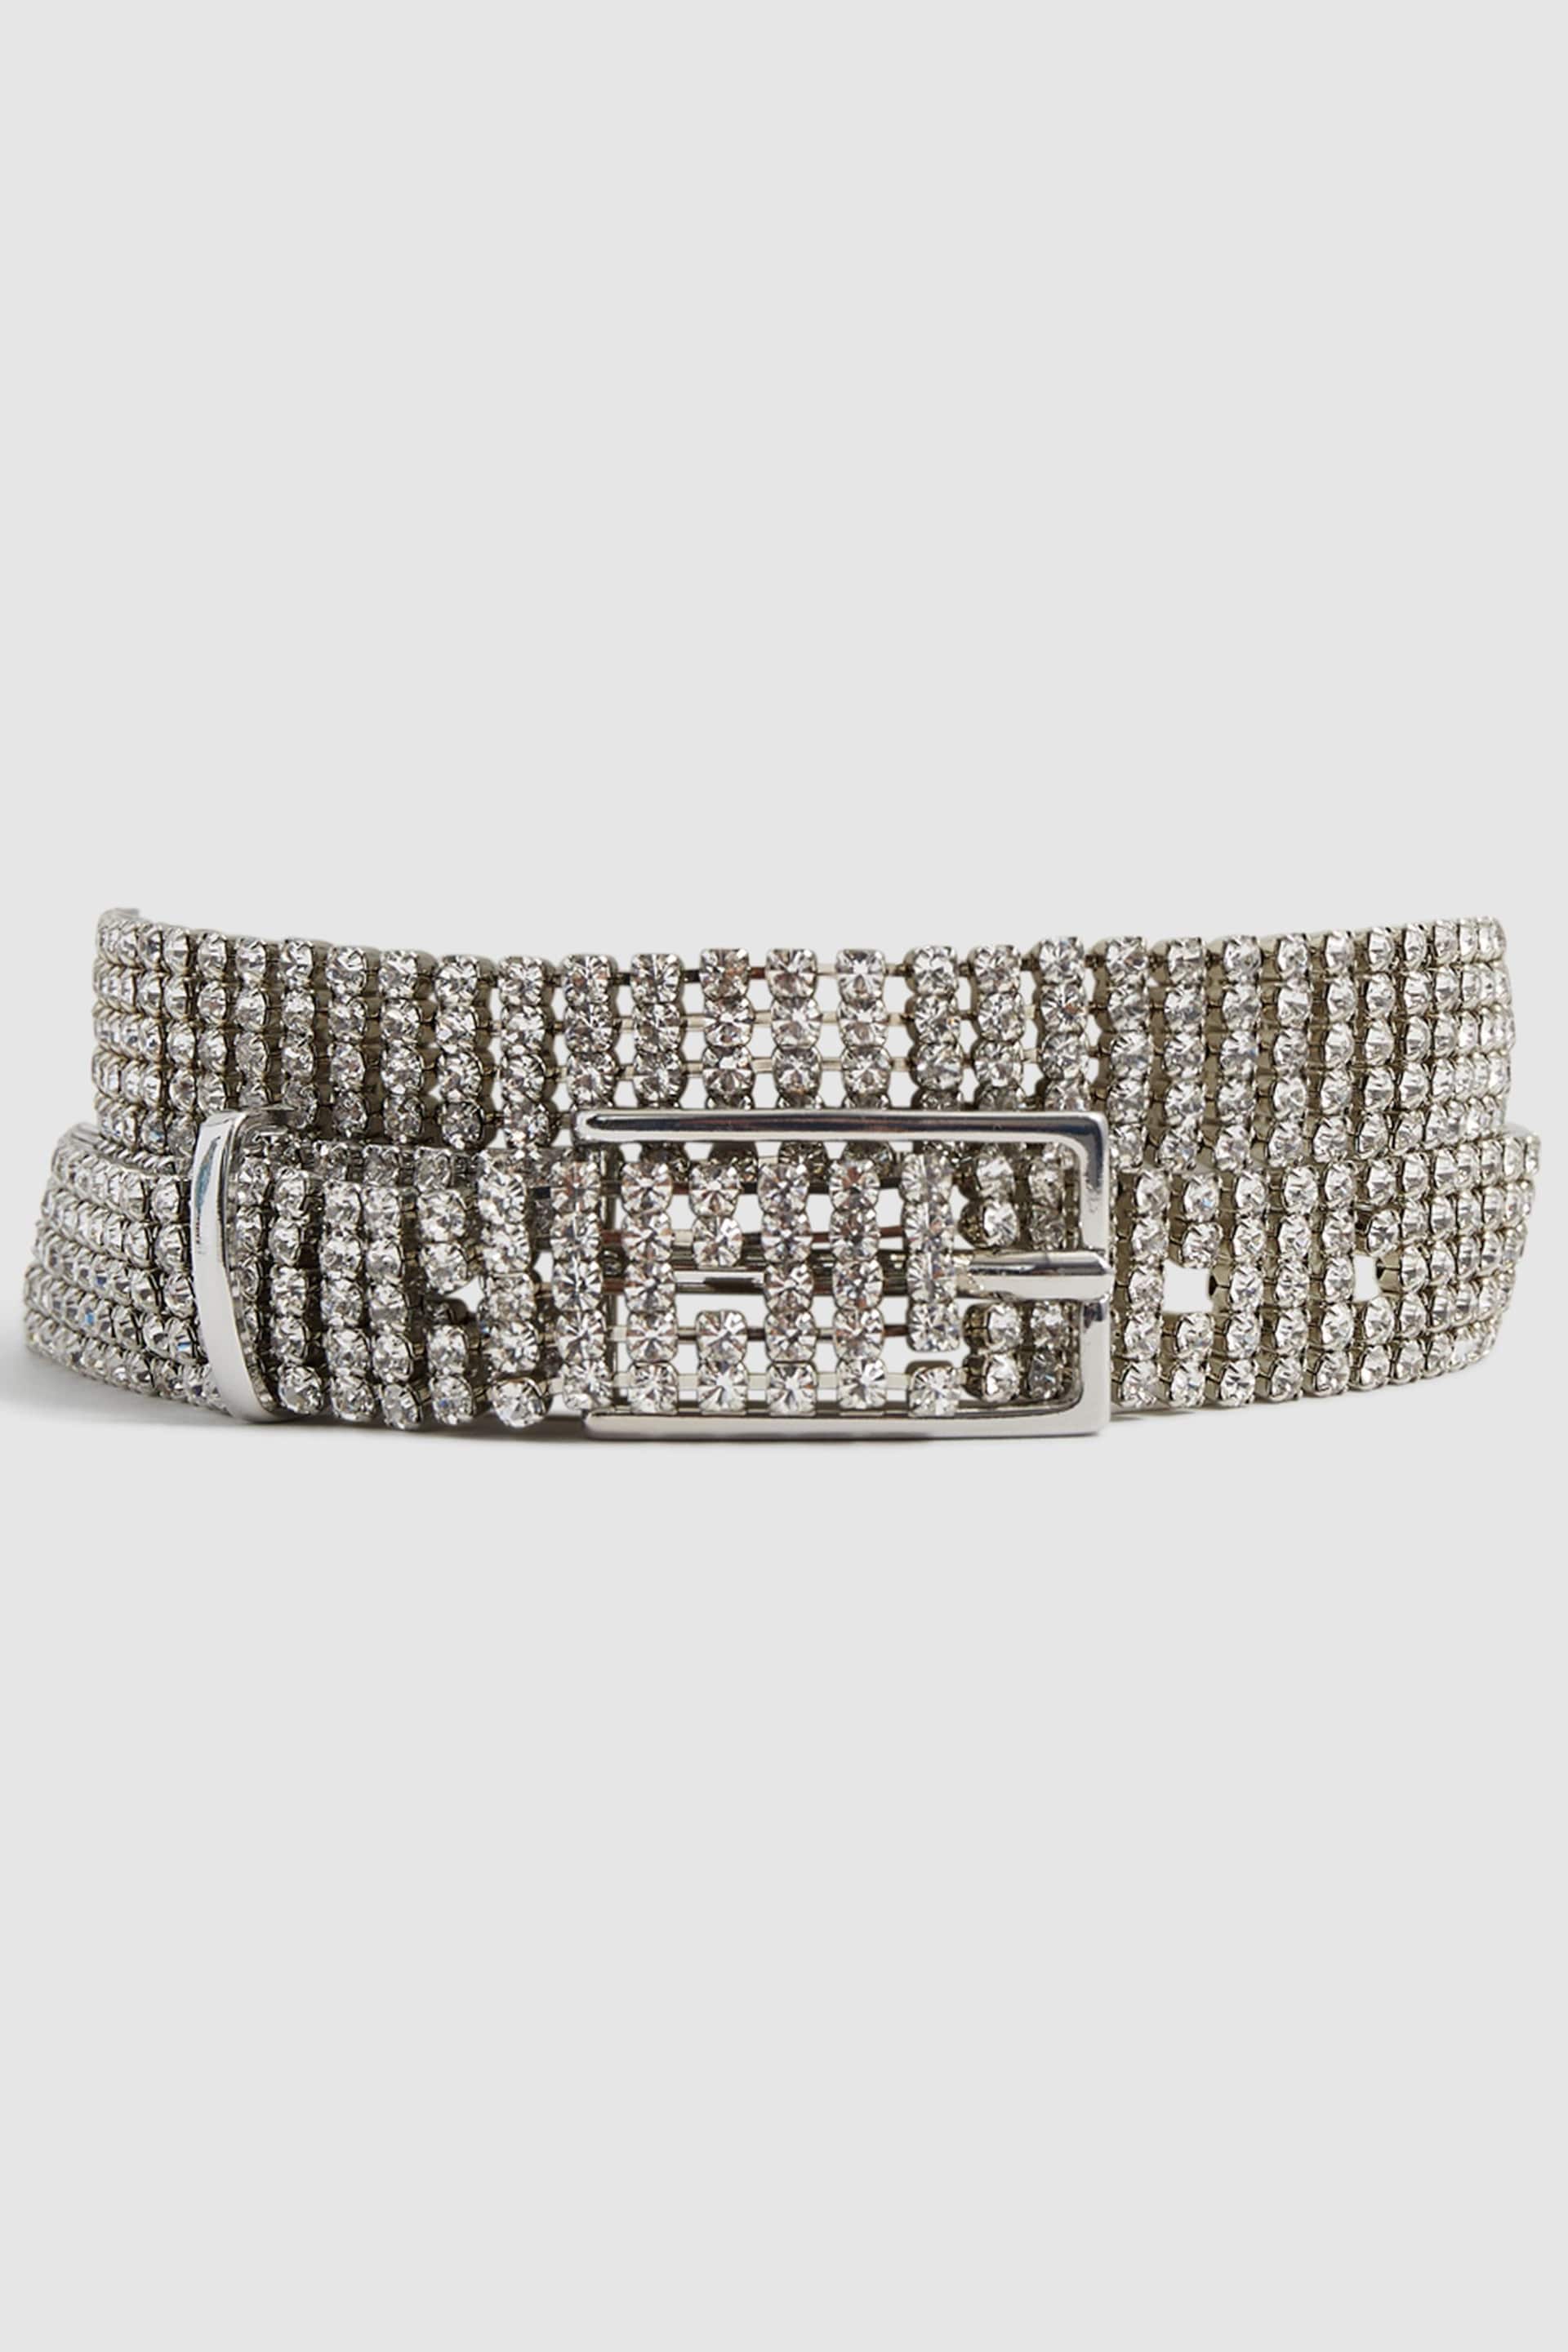 Reiss Silver Cara Crystal Chainmail Belt - Image 1 of 5